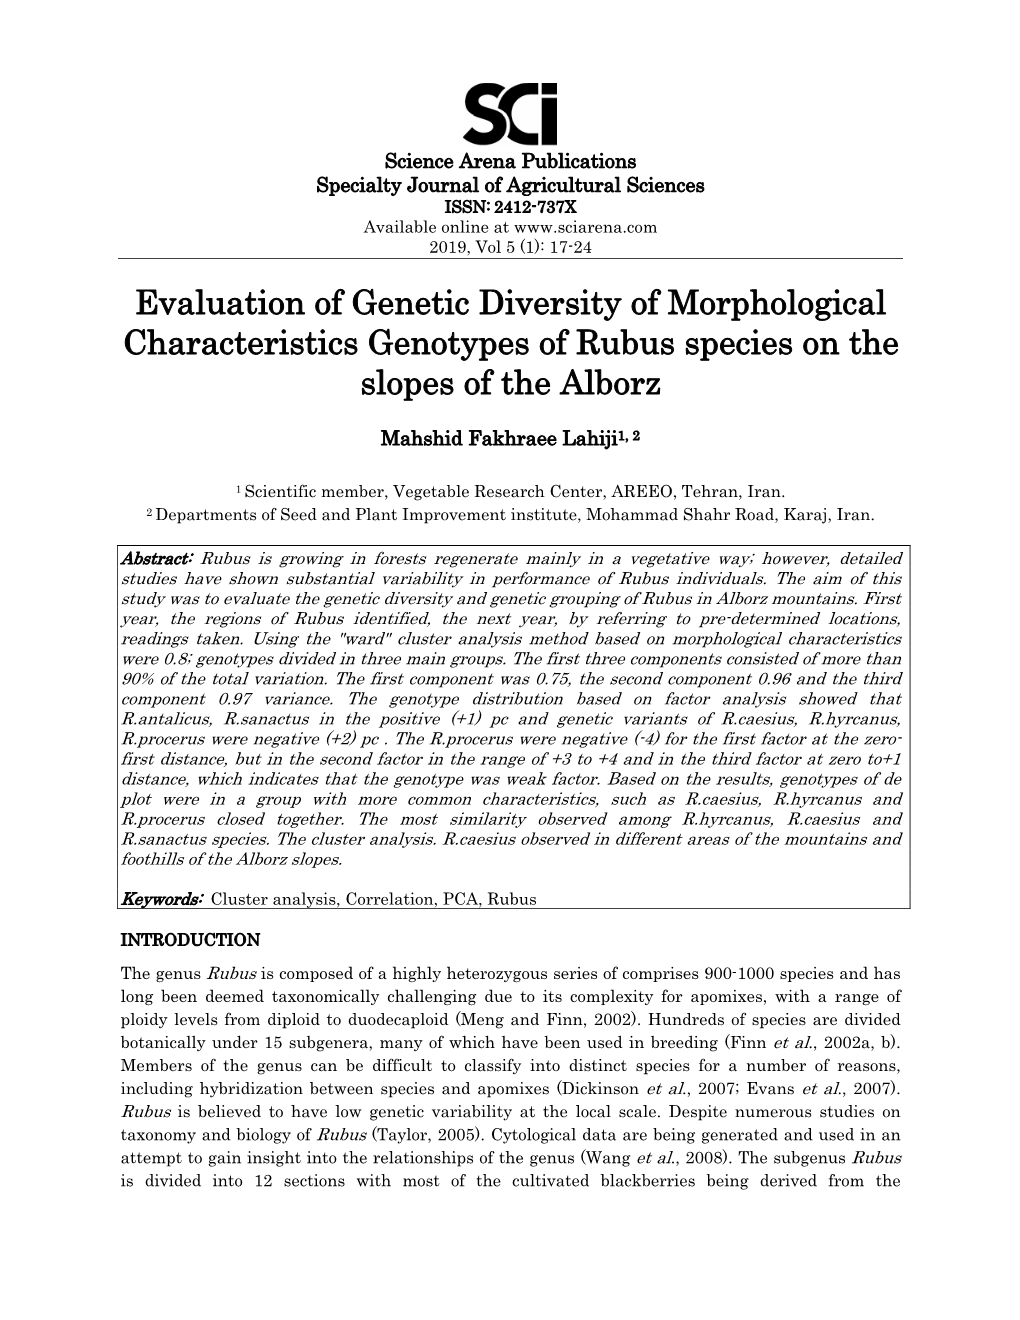 Evaluation of Genetic Diversity of Morphological Characteristics Genotypes of Rubus Species on the Slopes of the Alborz